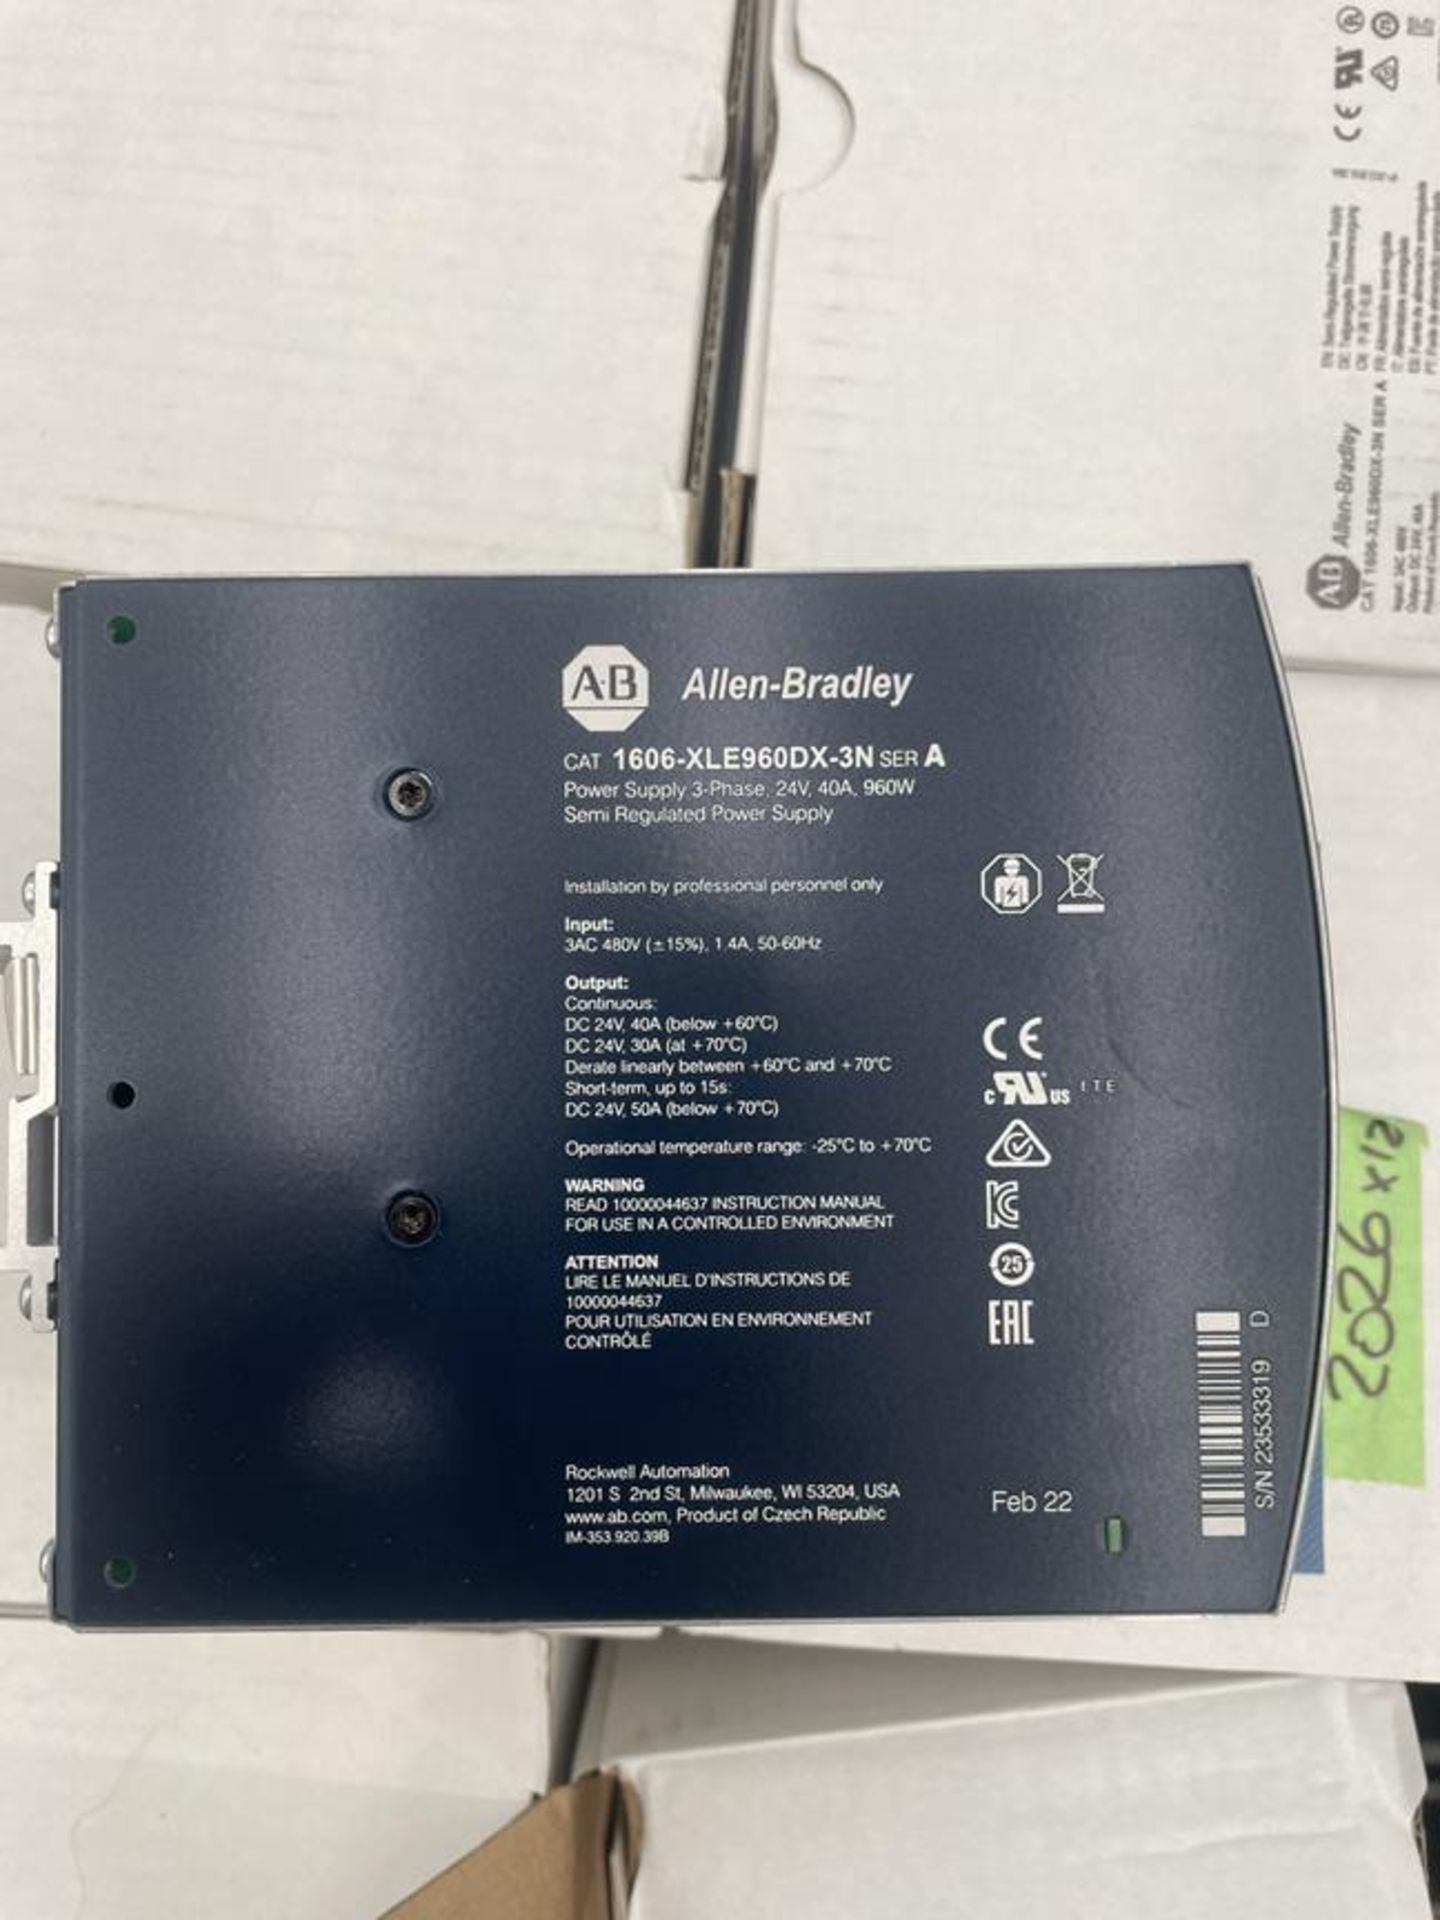 12x (no.) Allen-Bradley, 1606-XLE power supply units (boxed and unused) - Image 3 of 3